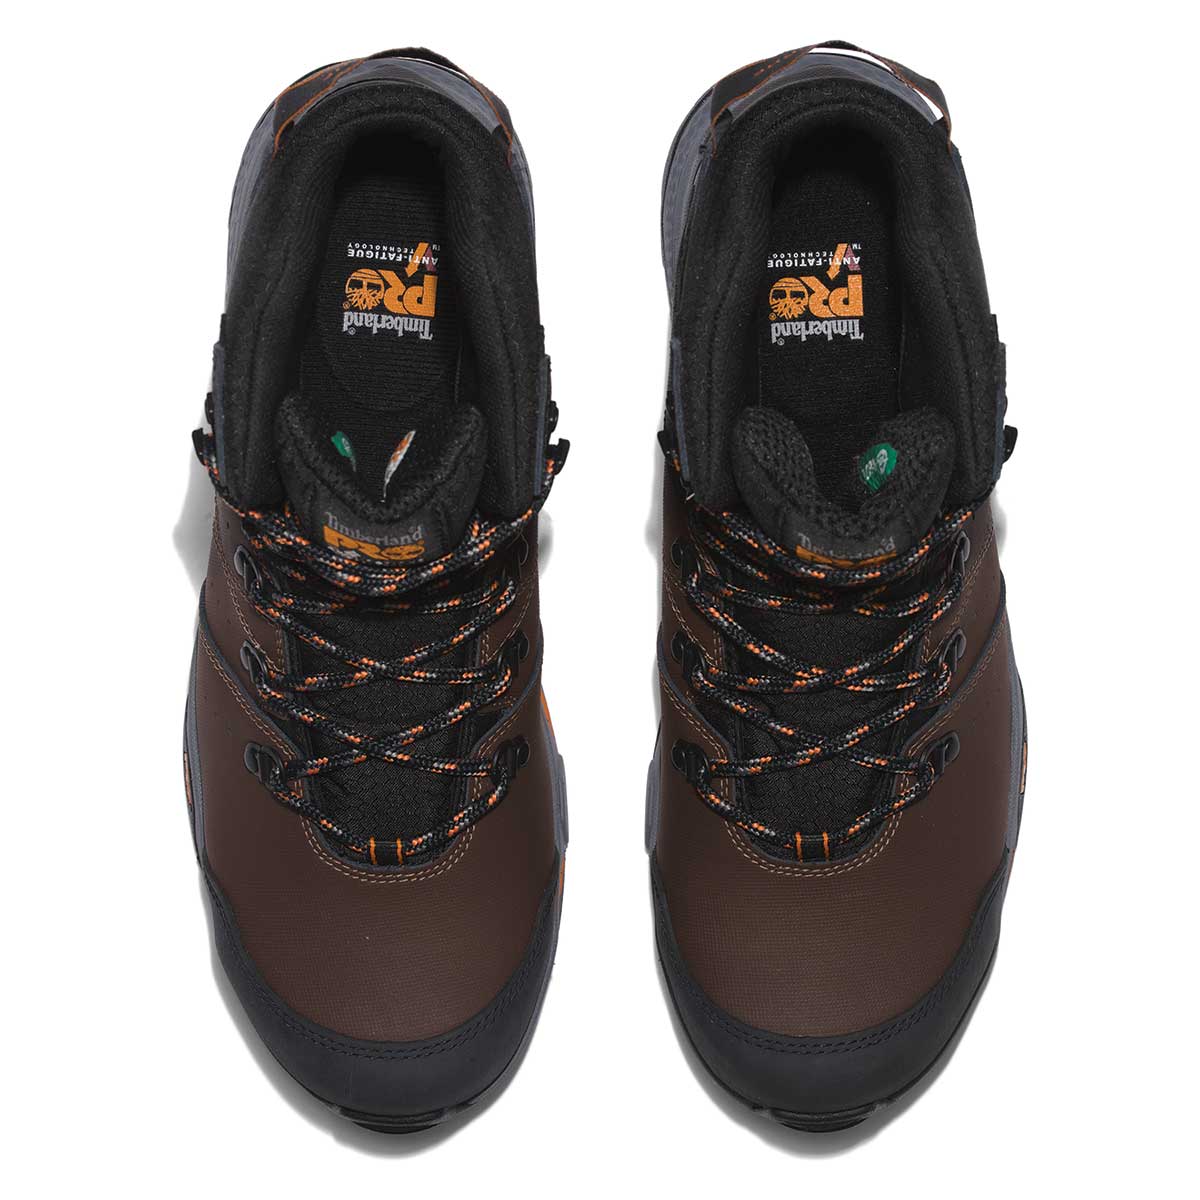 Timberland PRO Switchback Composite Toe Boots